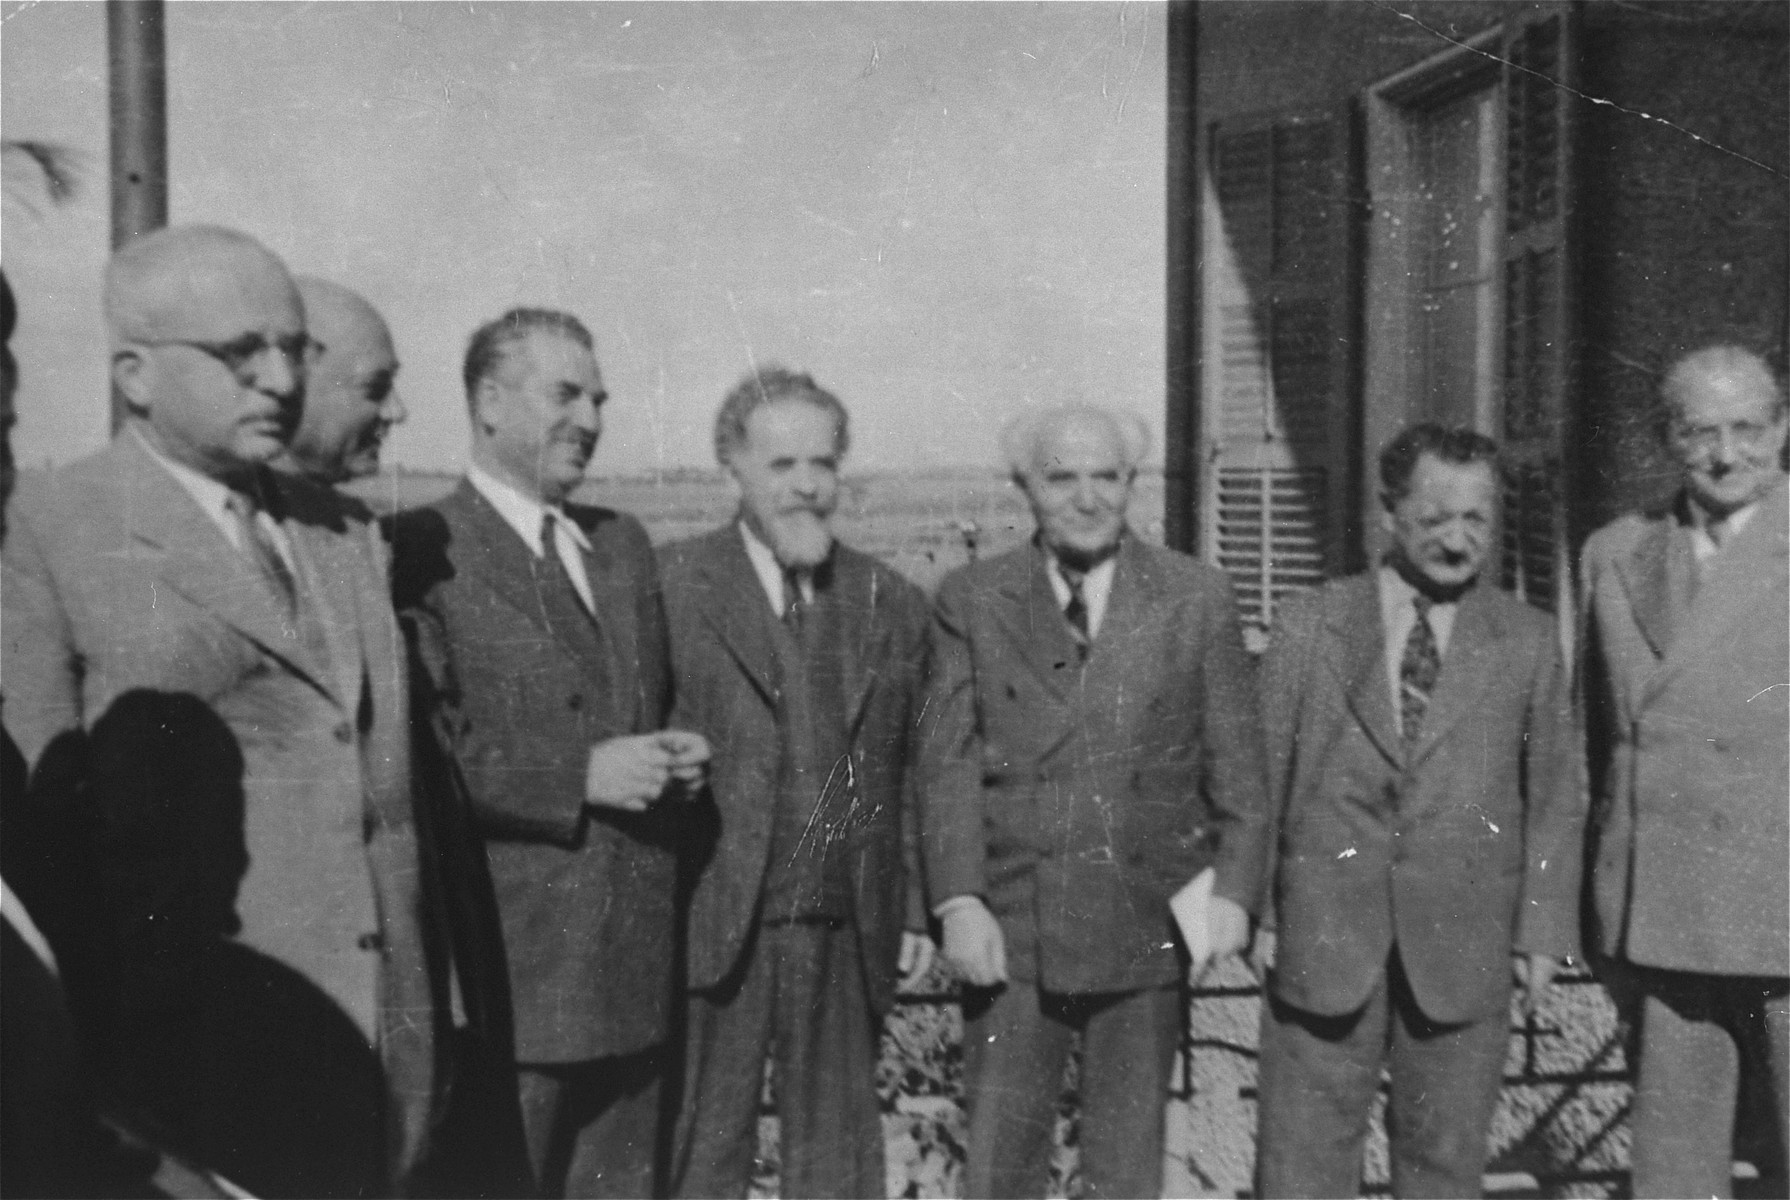 David Ben-Gurion poses with other Jewish leaders in Haifa during the transfer of Exodus 1947 passengers.